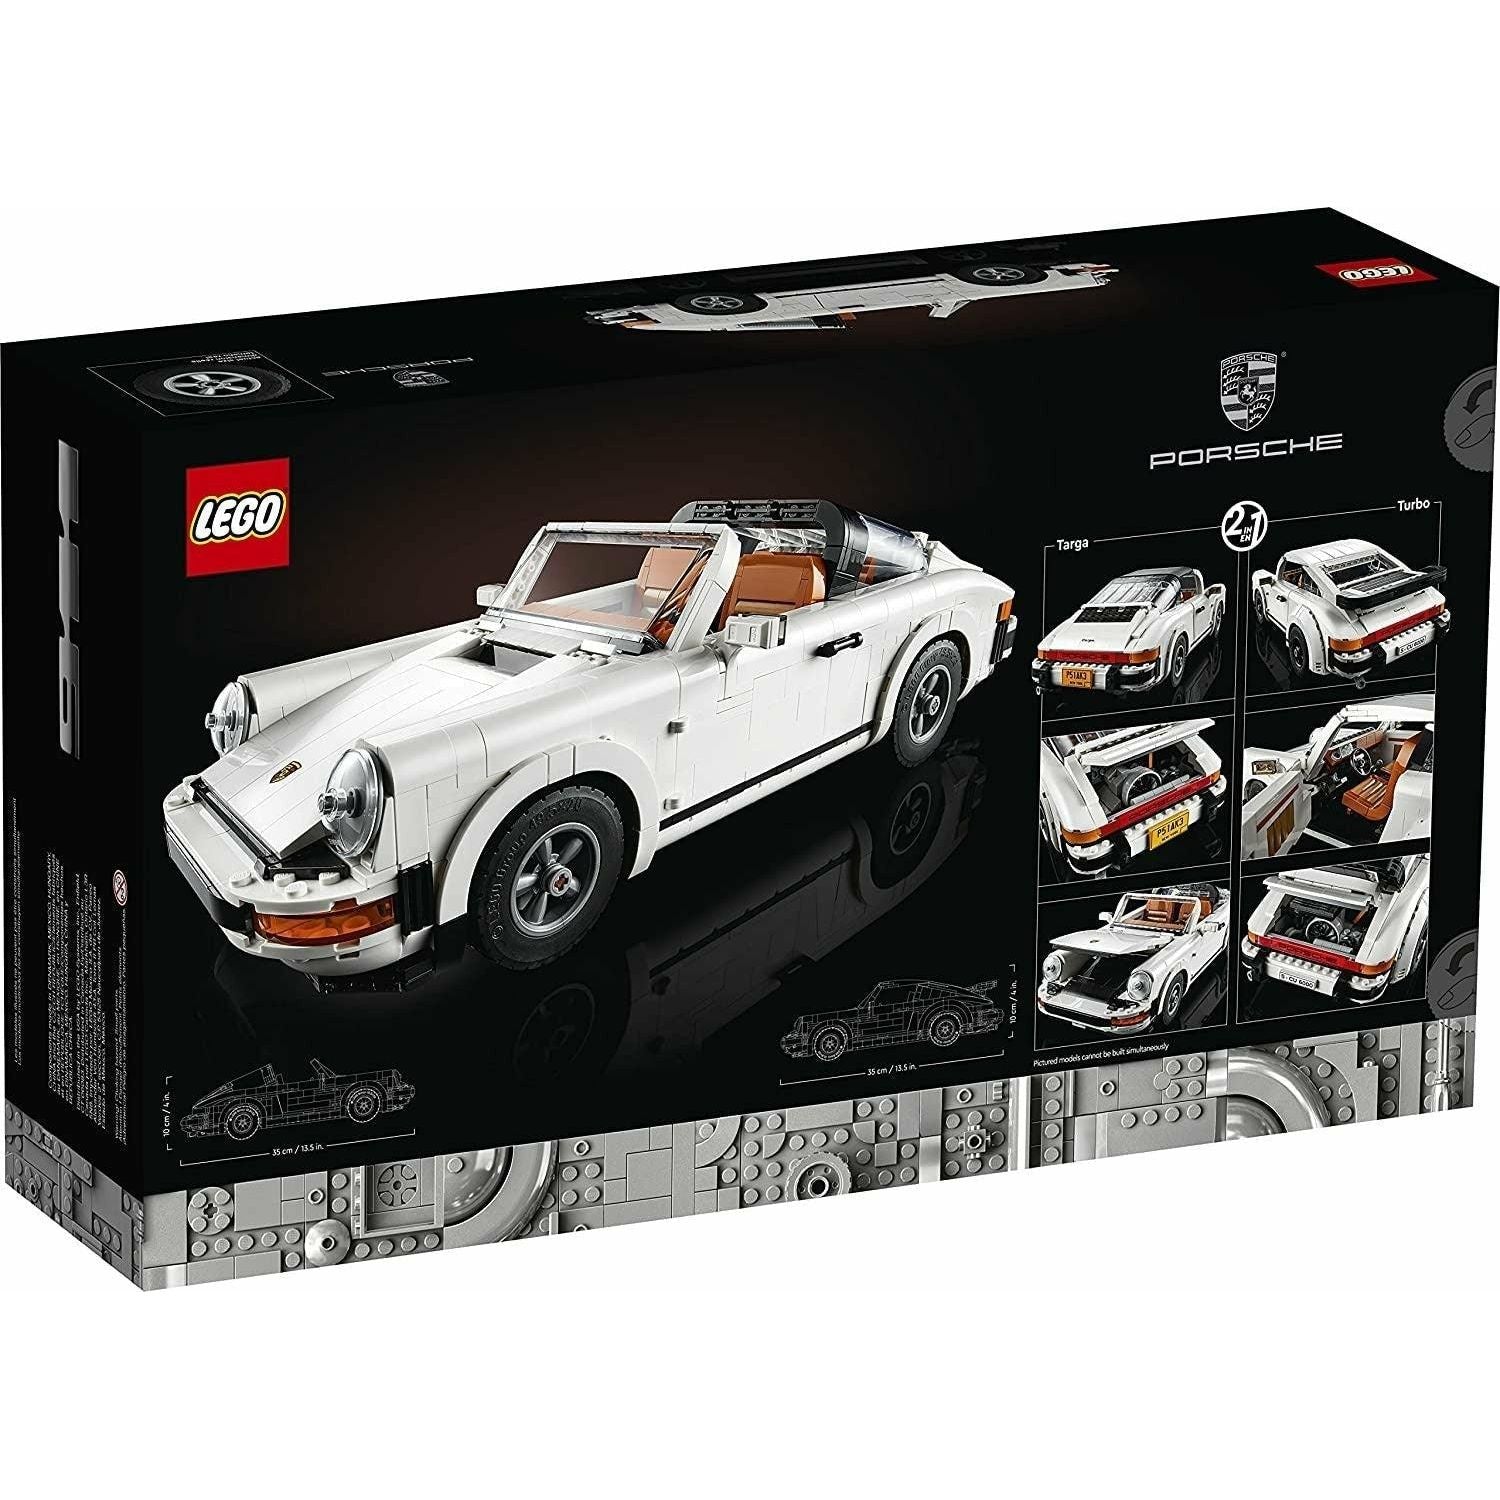 LEGO Porsche 911 (10295) Model Building Kit; Engaging Building Project (1,458 Pieces) - BumbleToys - 14 Years & Up, 18+, Boys, Creator Expert, LEGO, Pre-Order